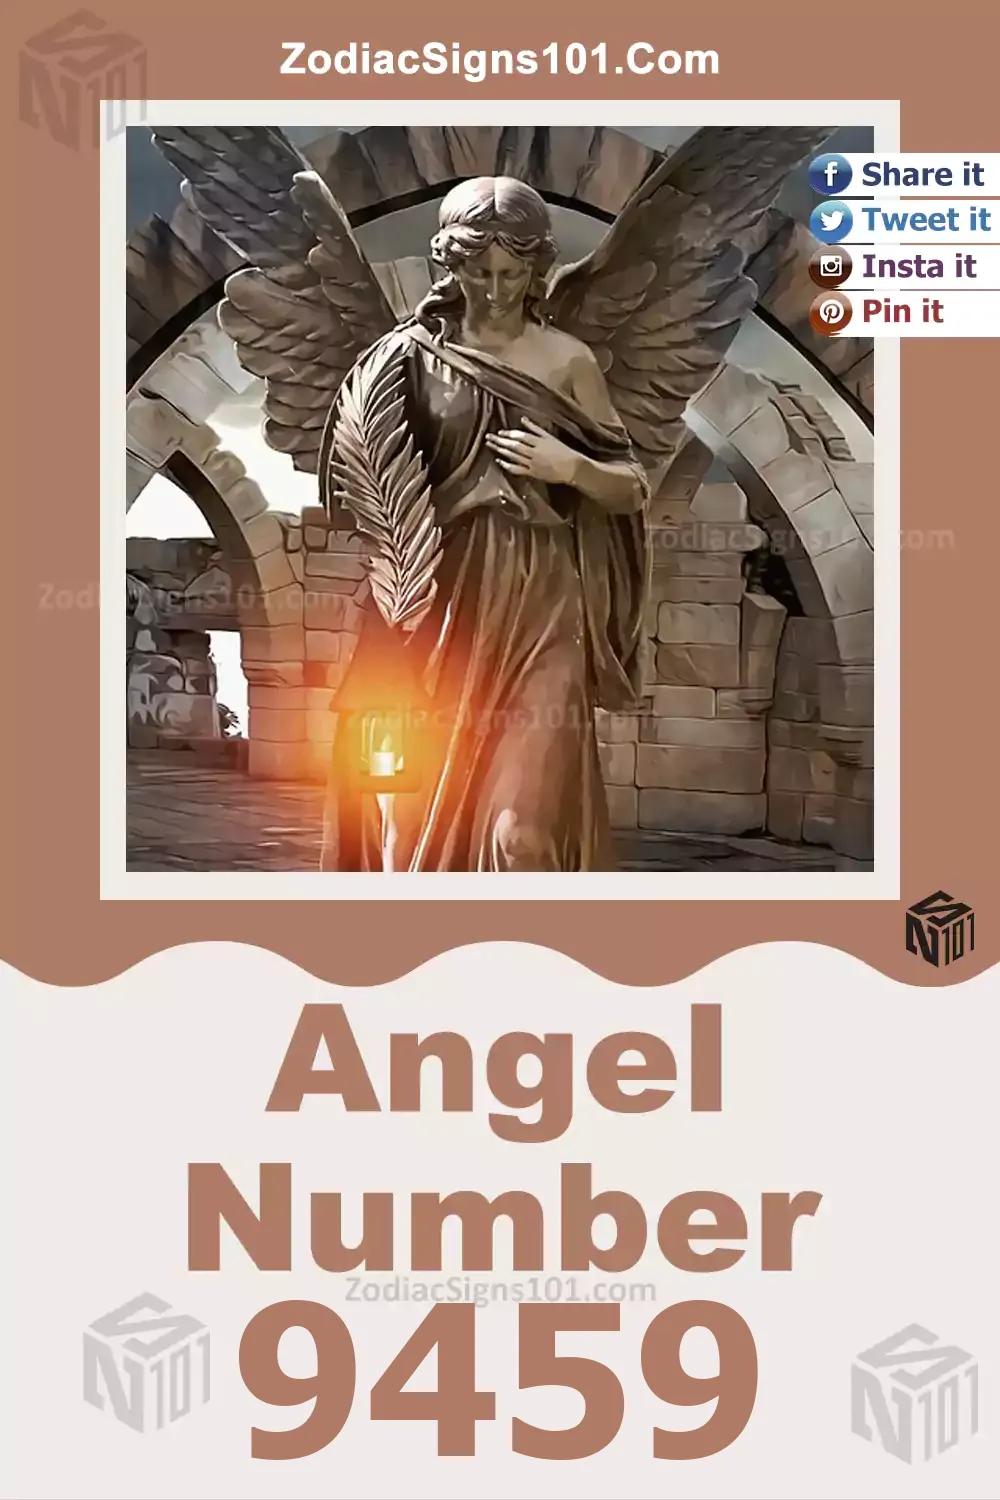 9459 Angel Number Meaning